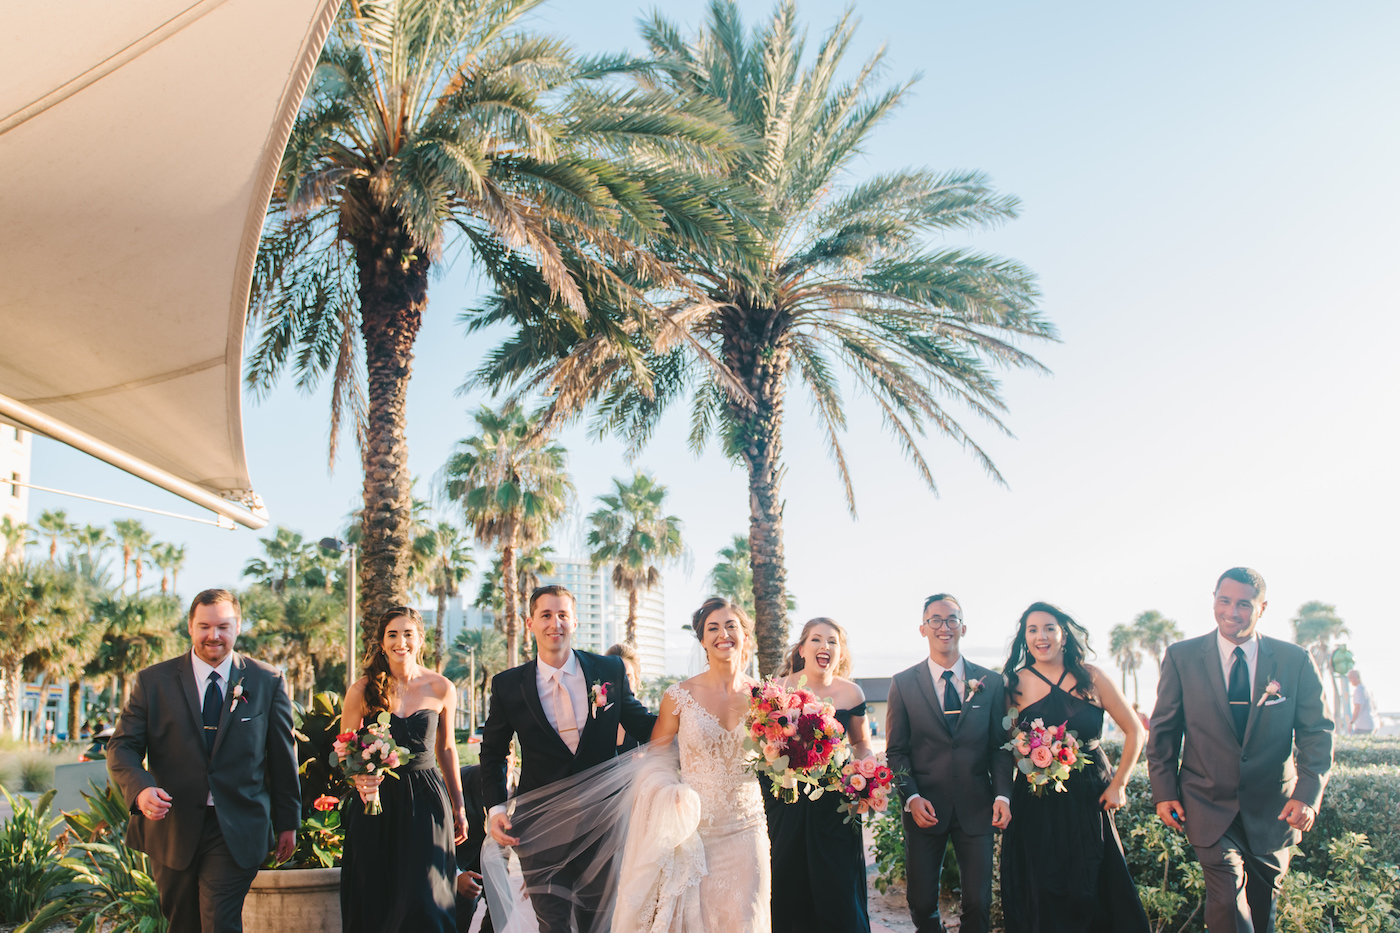 Clearwater Wedding Party Portrait | Bridesmaids in Black Long Dresses with Bright Colorful Bouquets and Groomsmen in Grey Suits | Tampa Bay Wedding Photographer Kera Photography